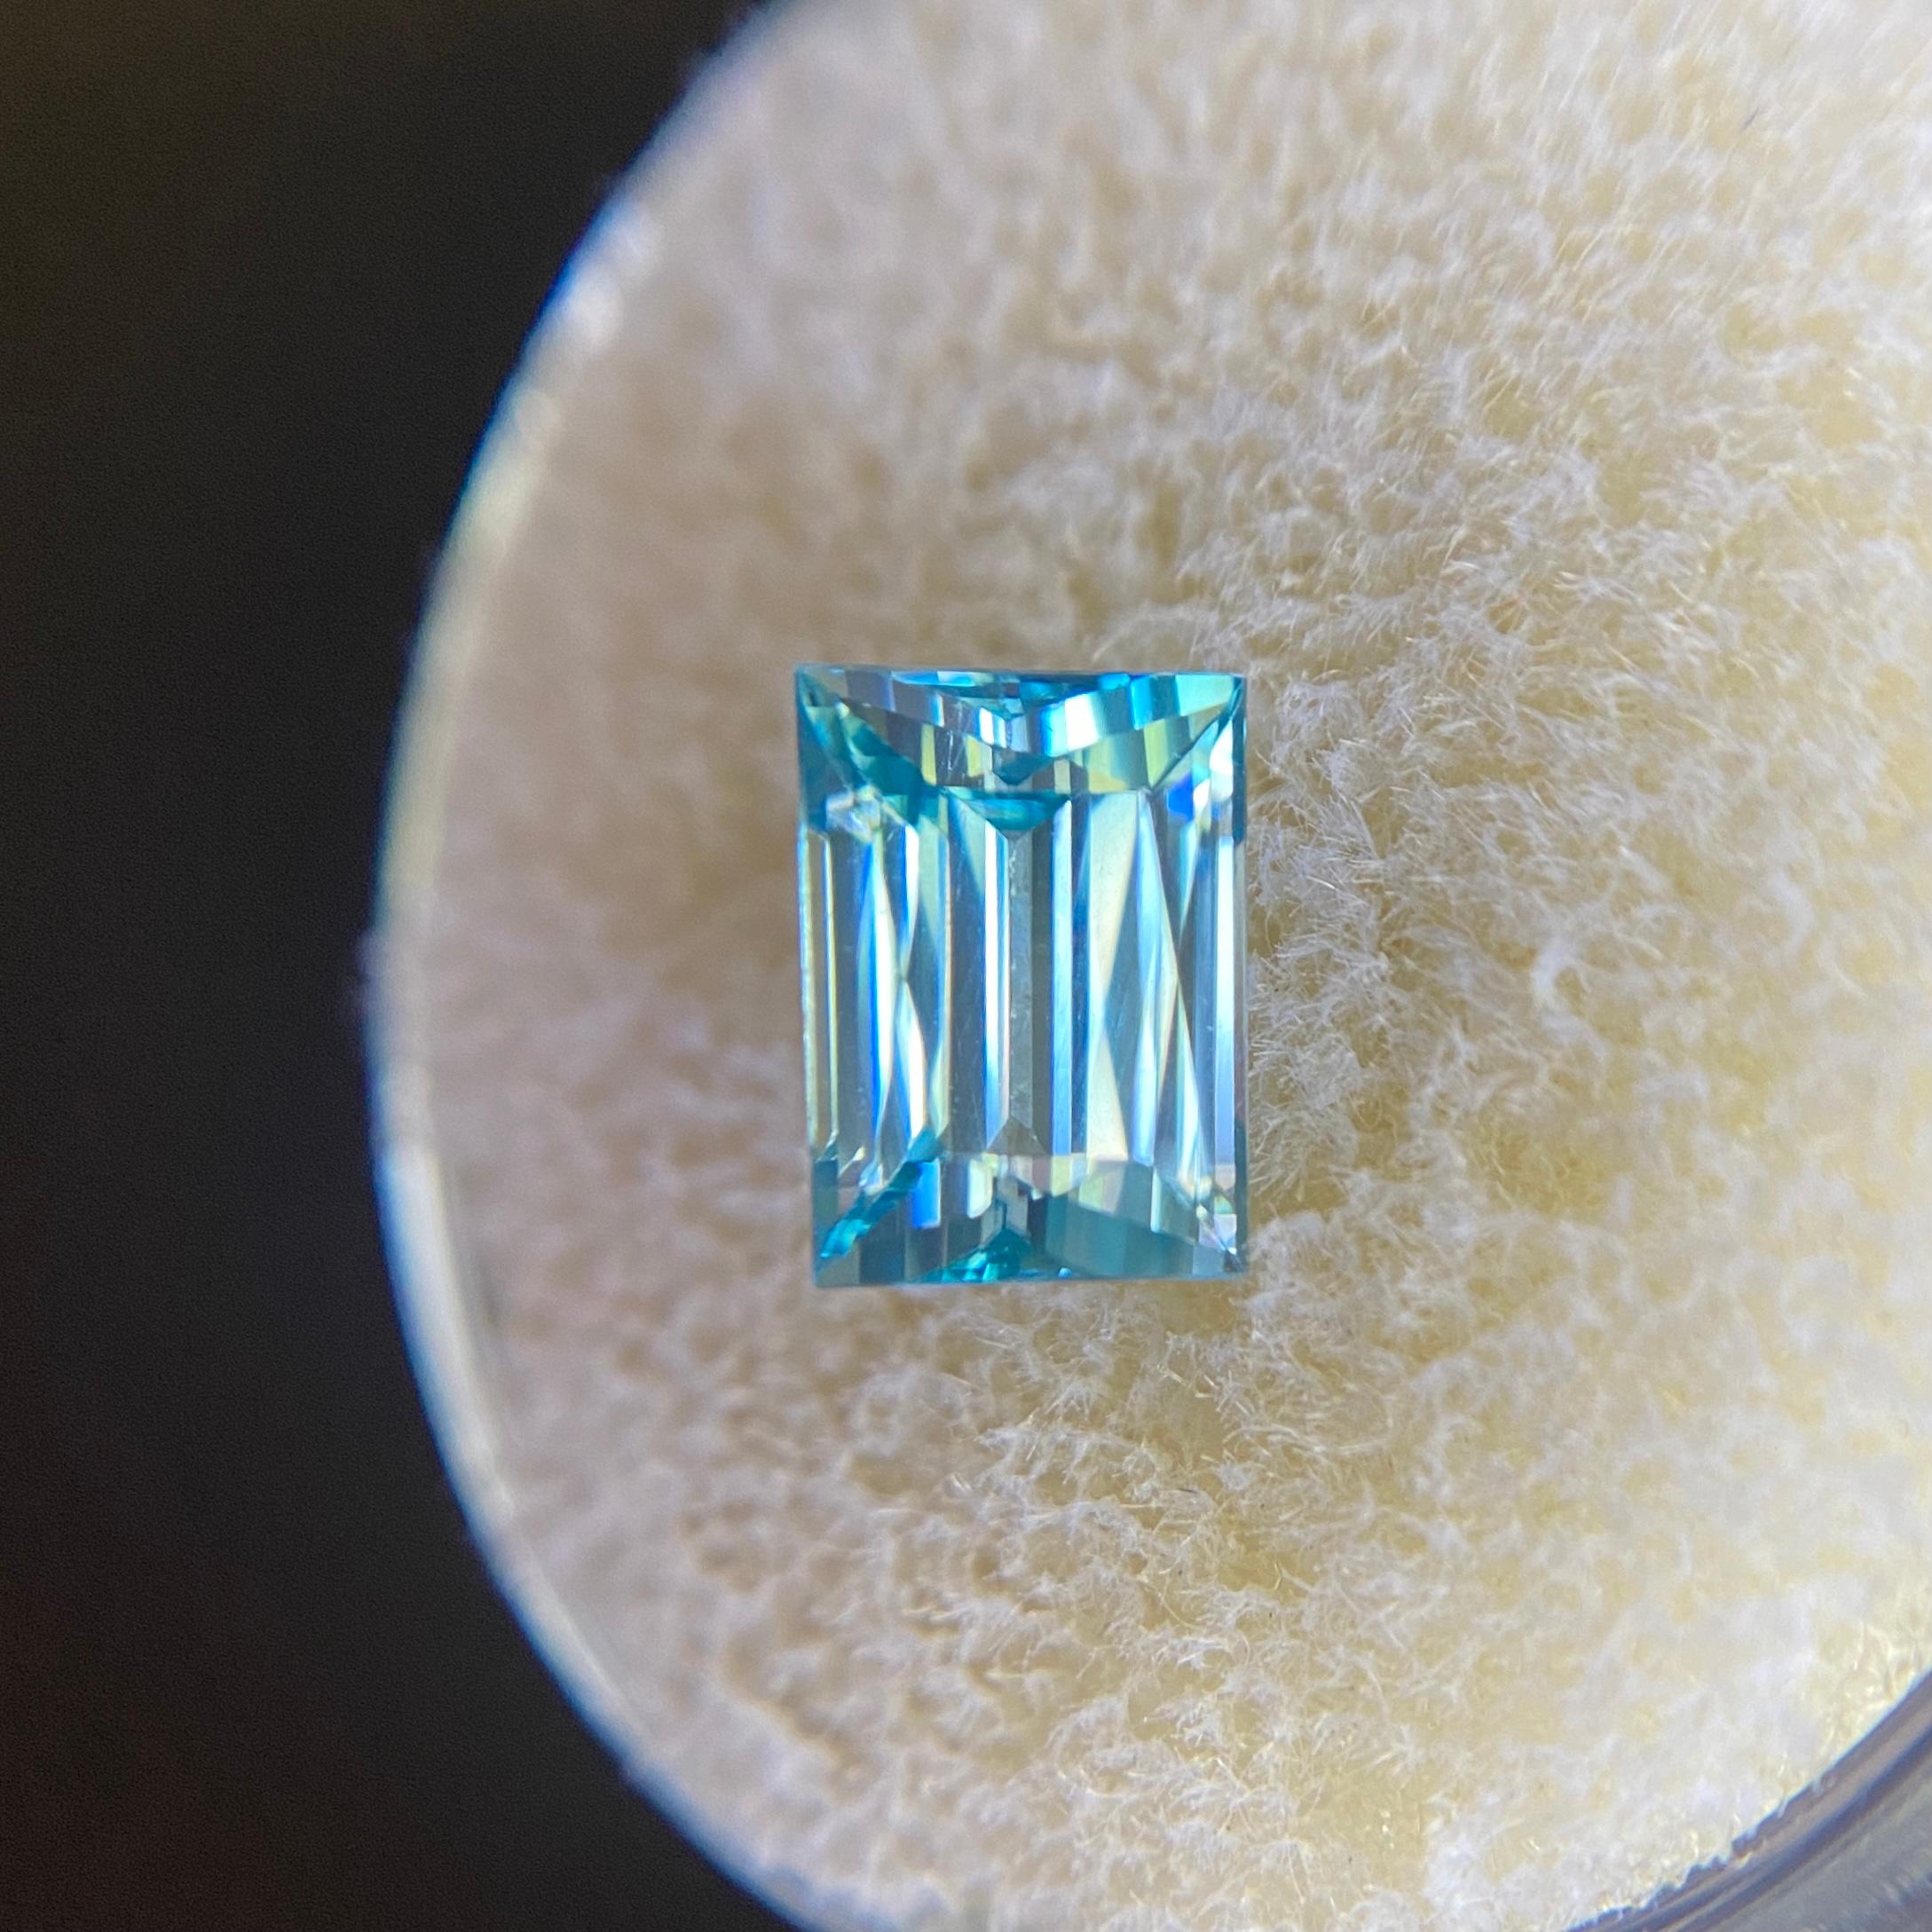 Fine Natural Loose Blue Zircon Gemstone.

Stunning 2.38 carat stone with a beautiful vivid blue colour and very good clarity. A clean stone with only some small natural inclusions visible when looking closely.

Also has an excellent fancy baguette